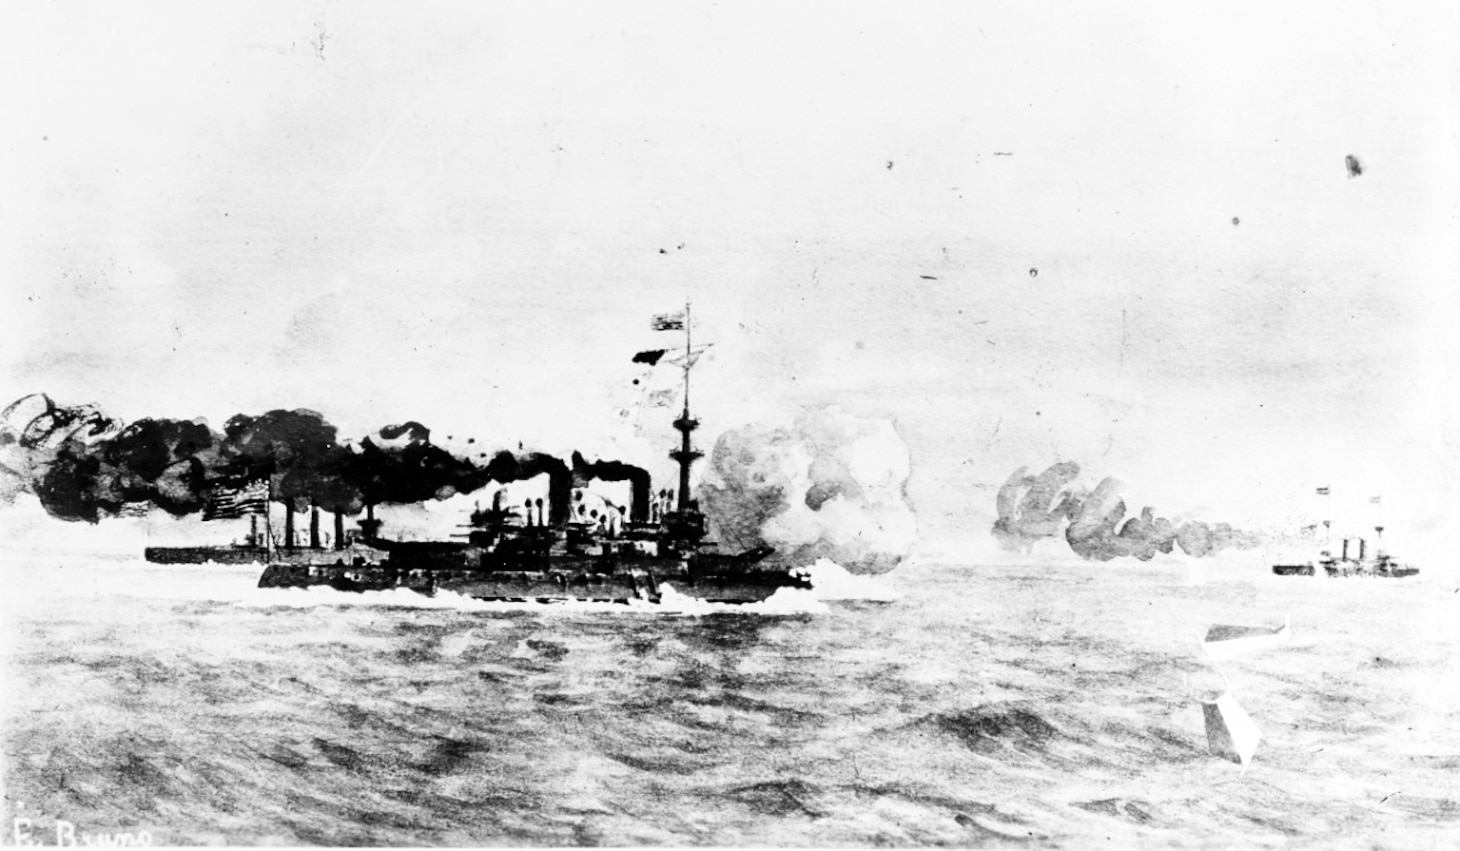 Painting of USS Brooklyn, Schley’s flagship, and USS Oregon pursuing Spanish cruiser Cristóbal Colón in the final hours of the Battle of Santiago Bay.